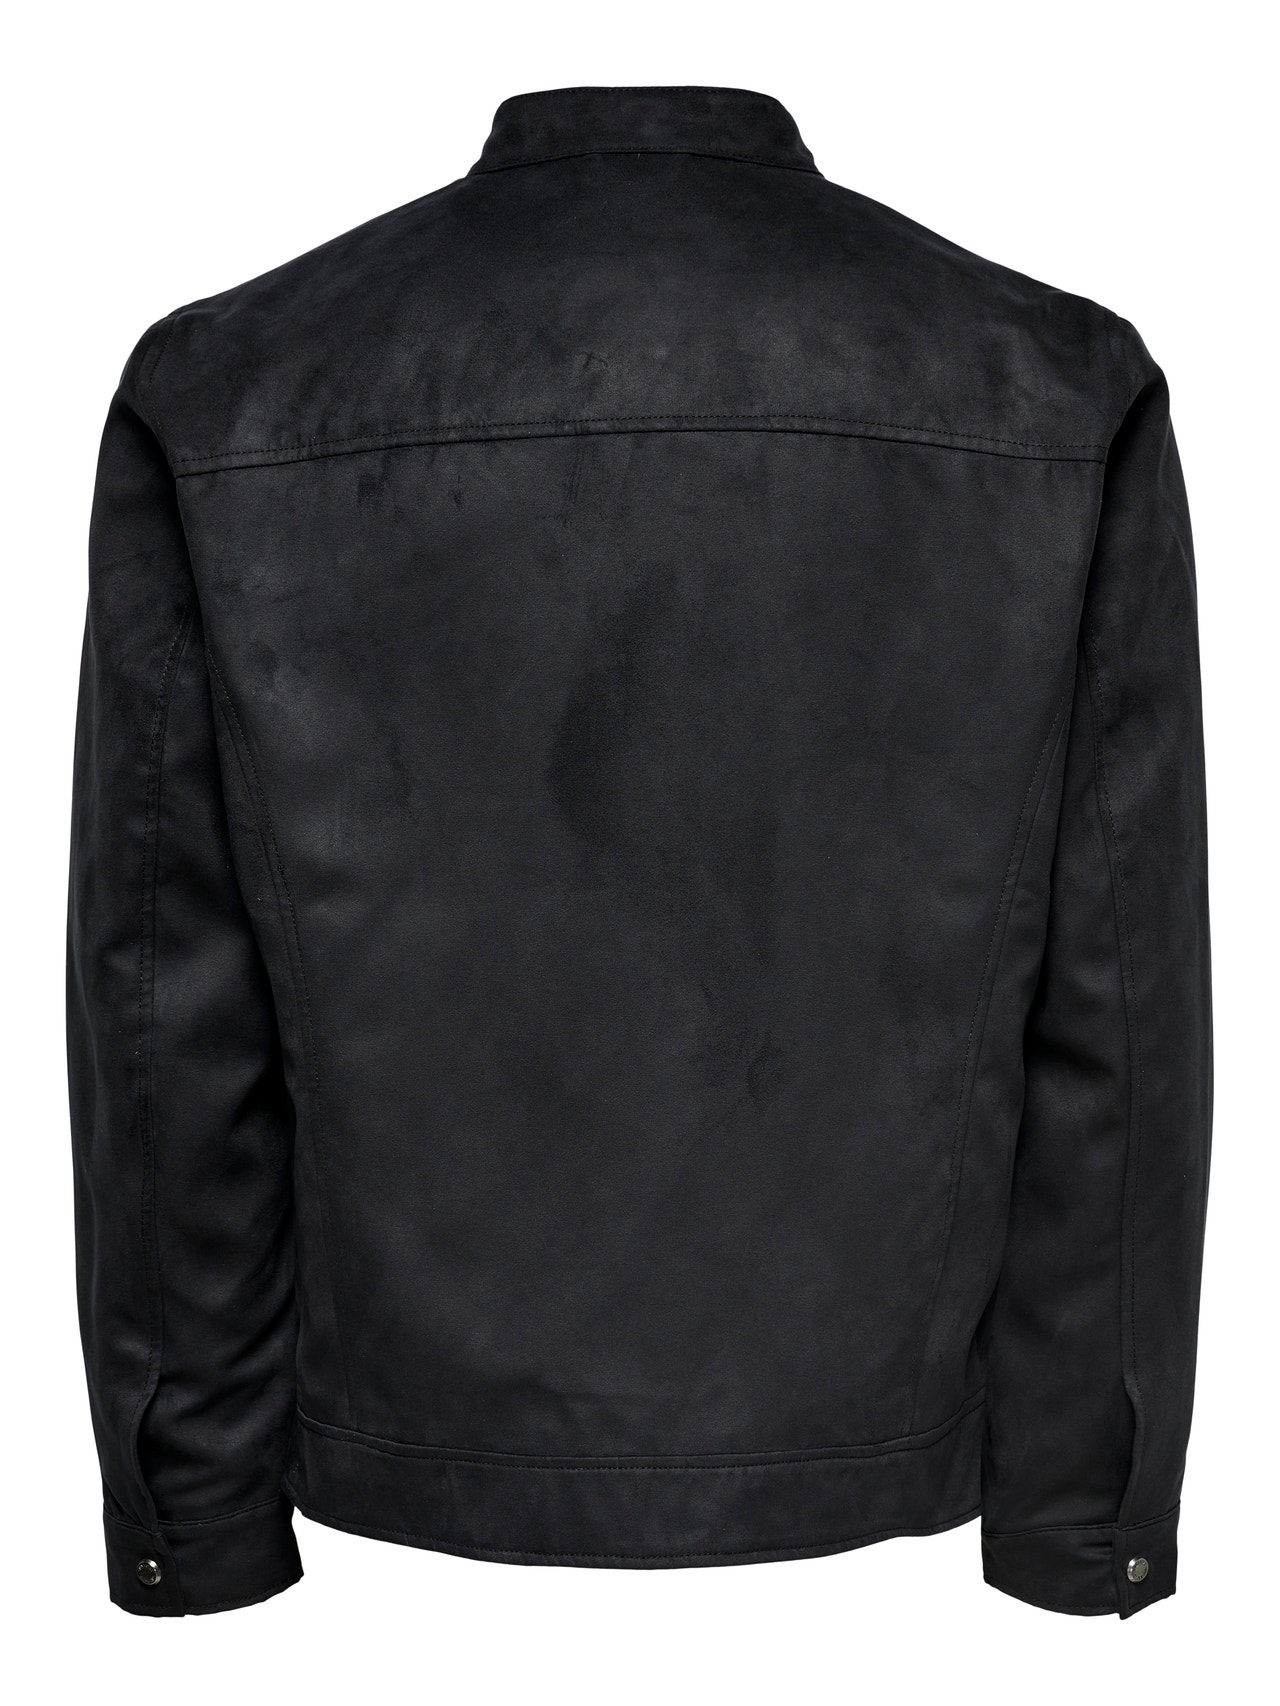 ONLY & SONS Jacke -Black - 22021446